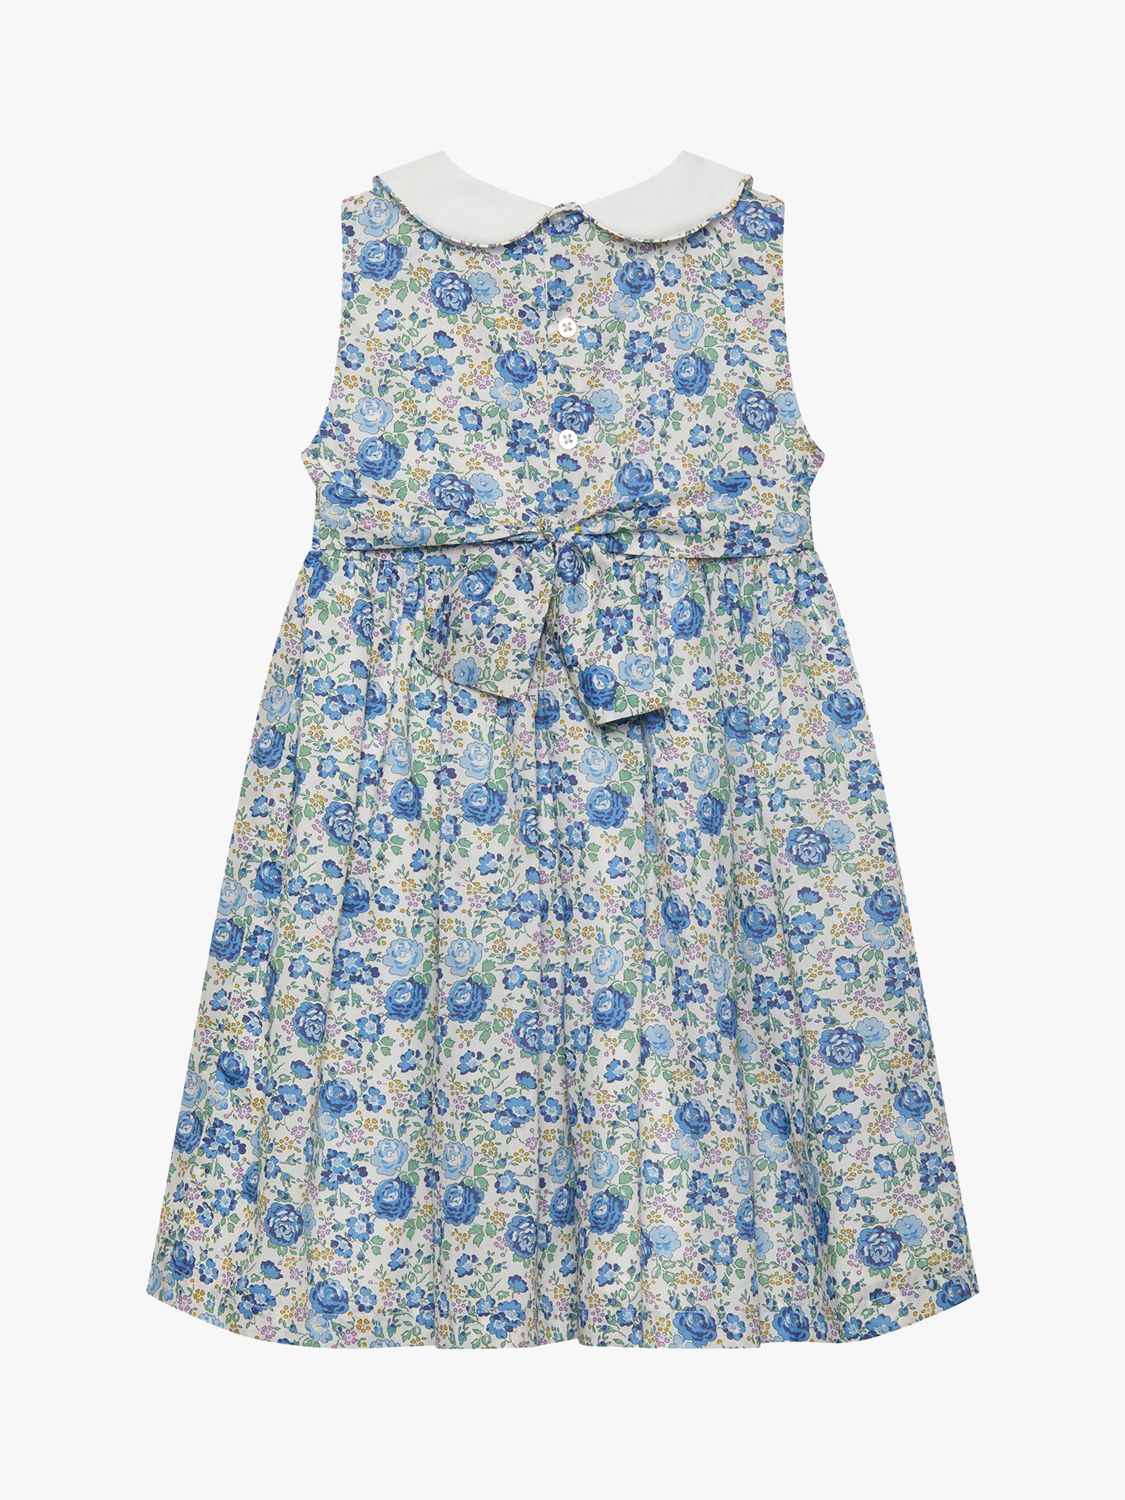 Trotters Kids' Liberty's Felicite Floral Print Peter Pan Collar Sleeveless Dress, Blue, 2 years